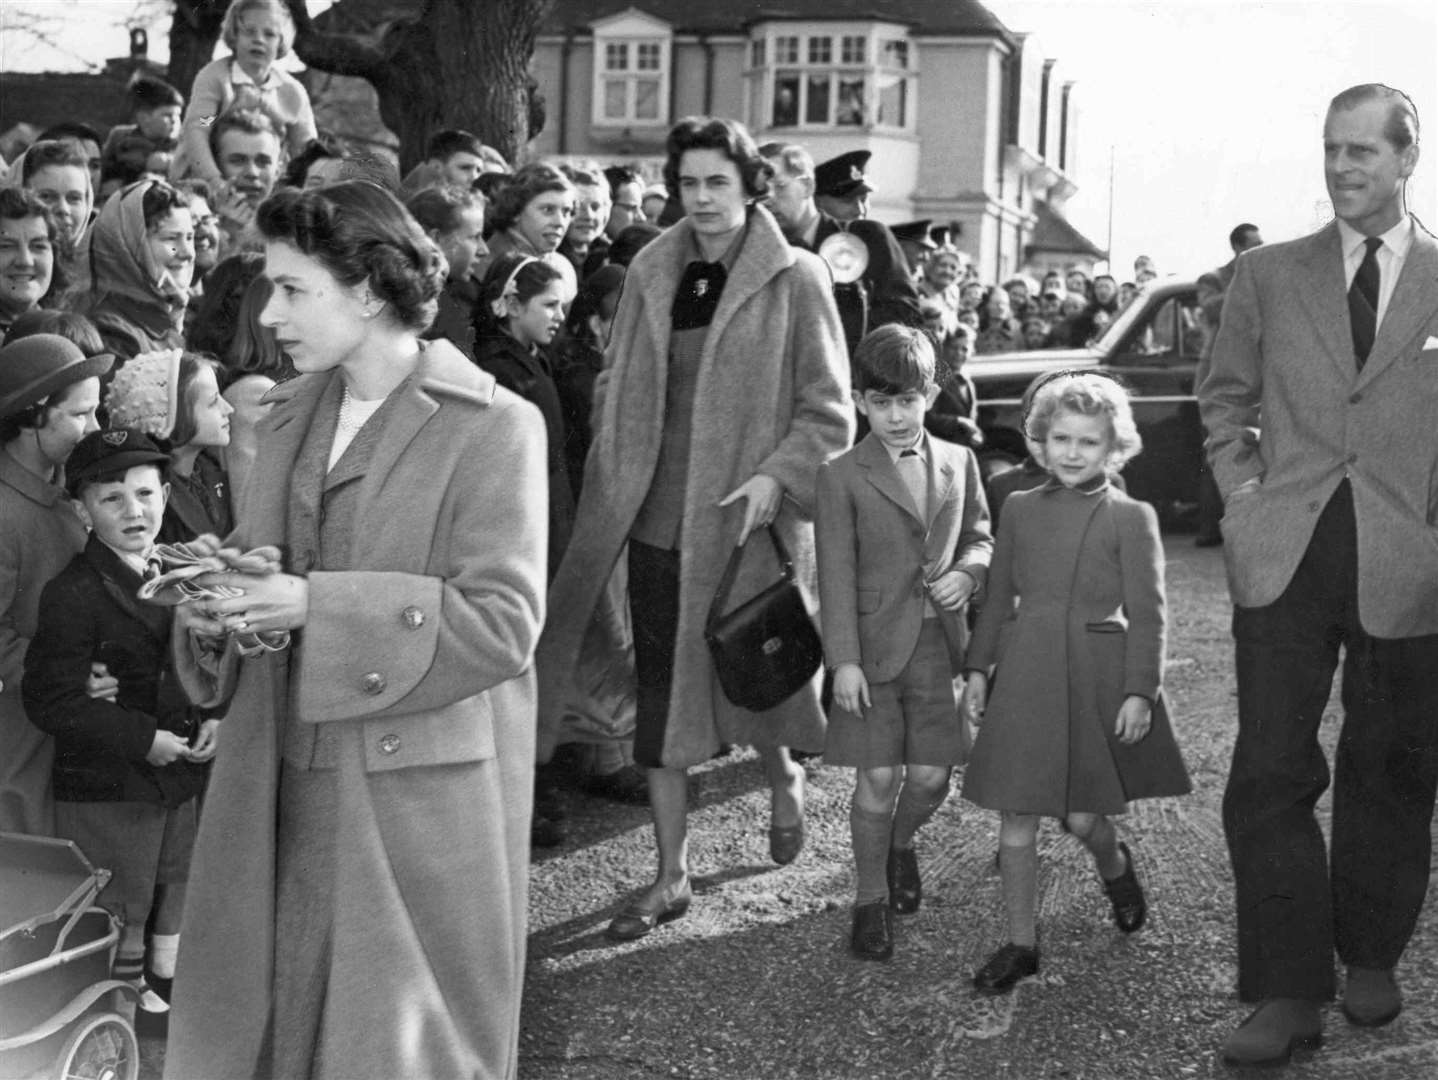 Just like any other family on a fun day out, The Queen and Duke of Edinburgh took their children Prince Charles and Princess Anne to the Romney, Hythe and Dymchurch Railway in April 1957